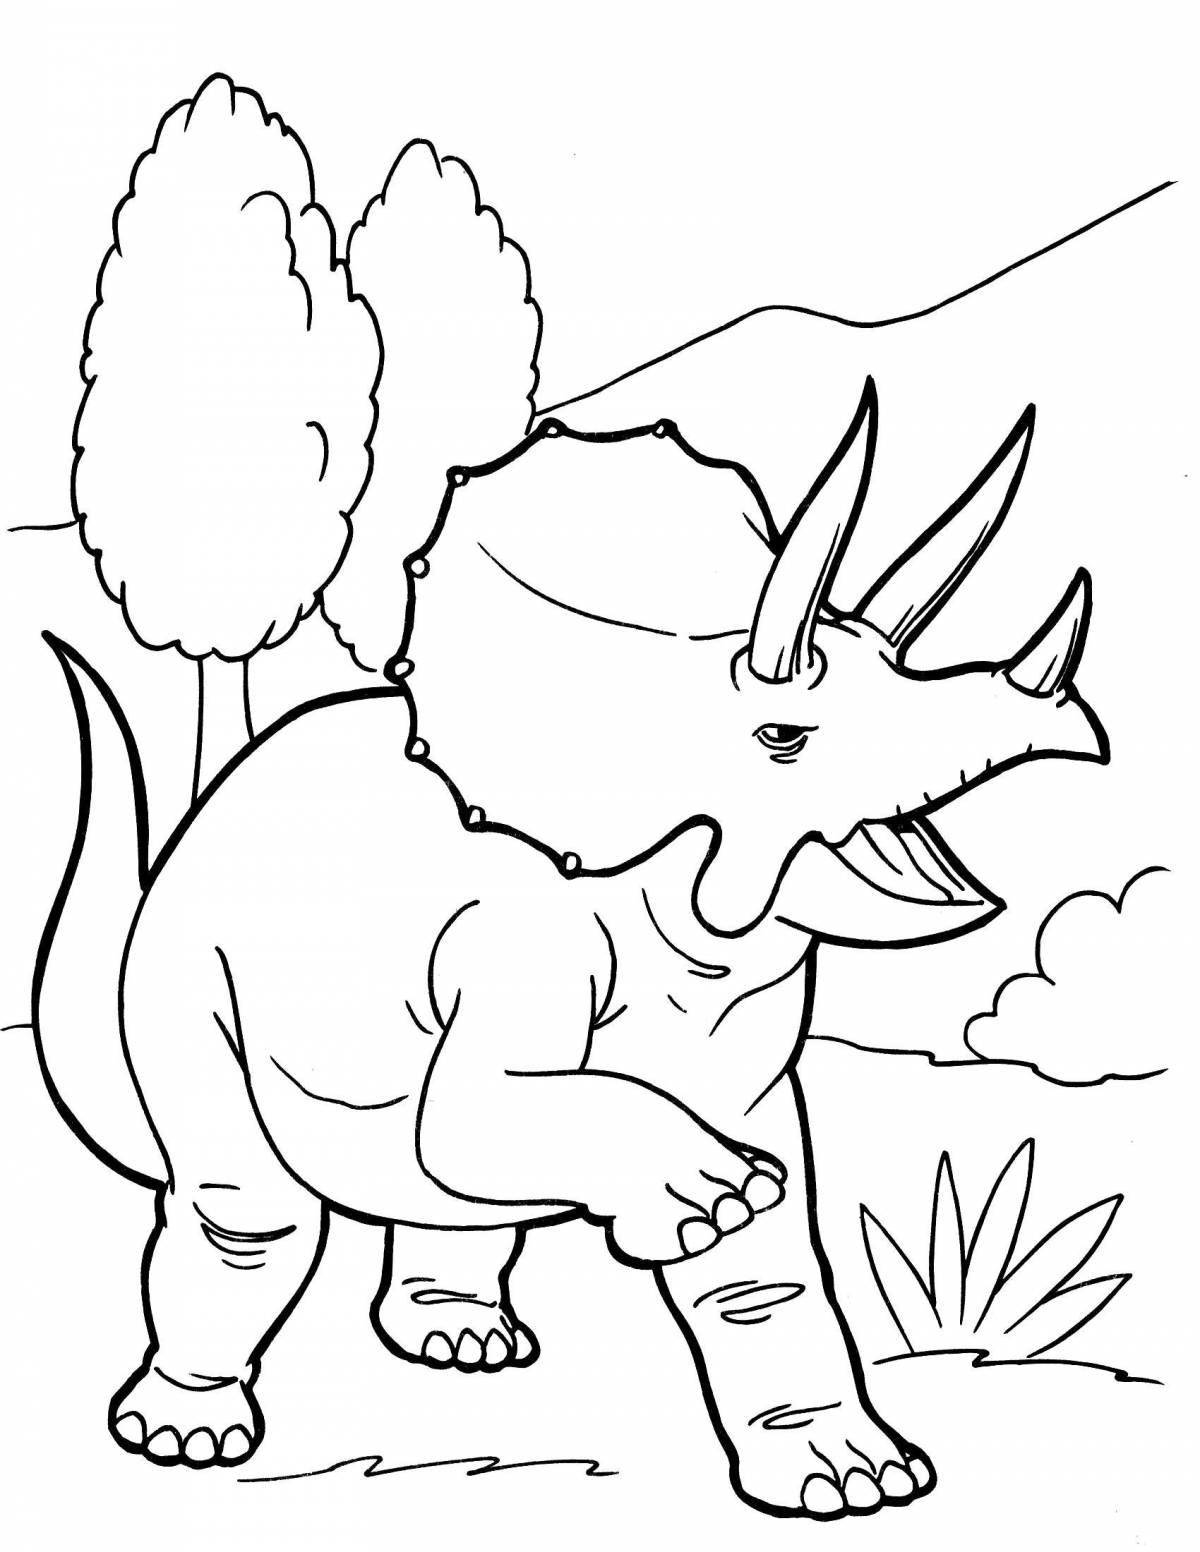 Coloring pages with playful dinosaurs for boys 6-7 years old